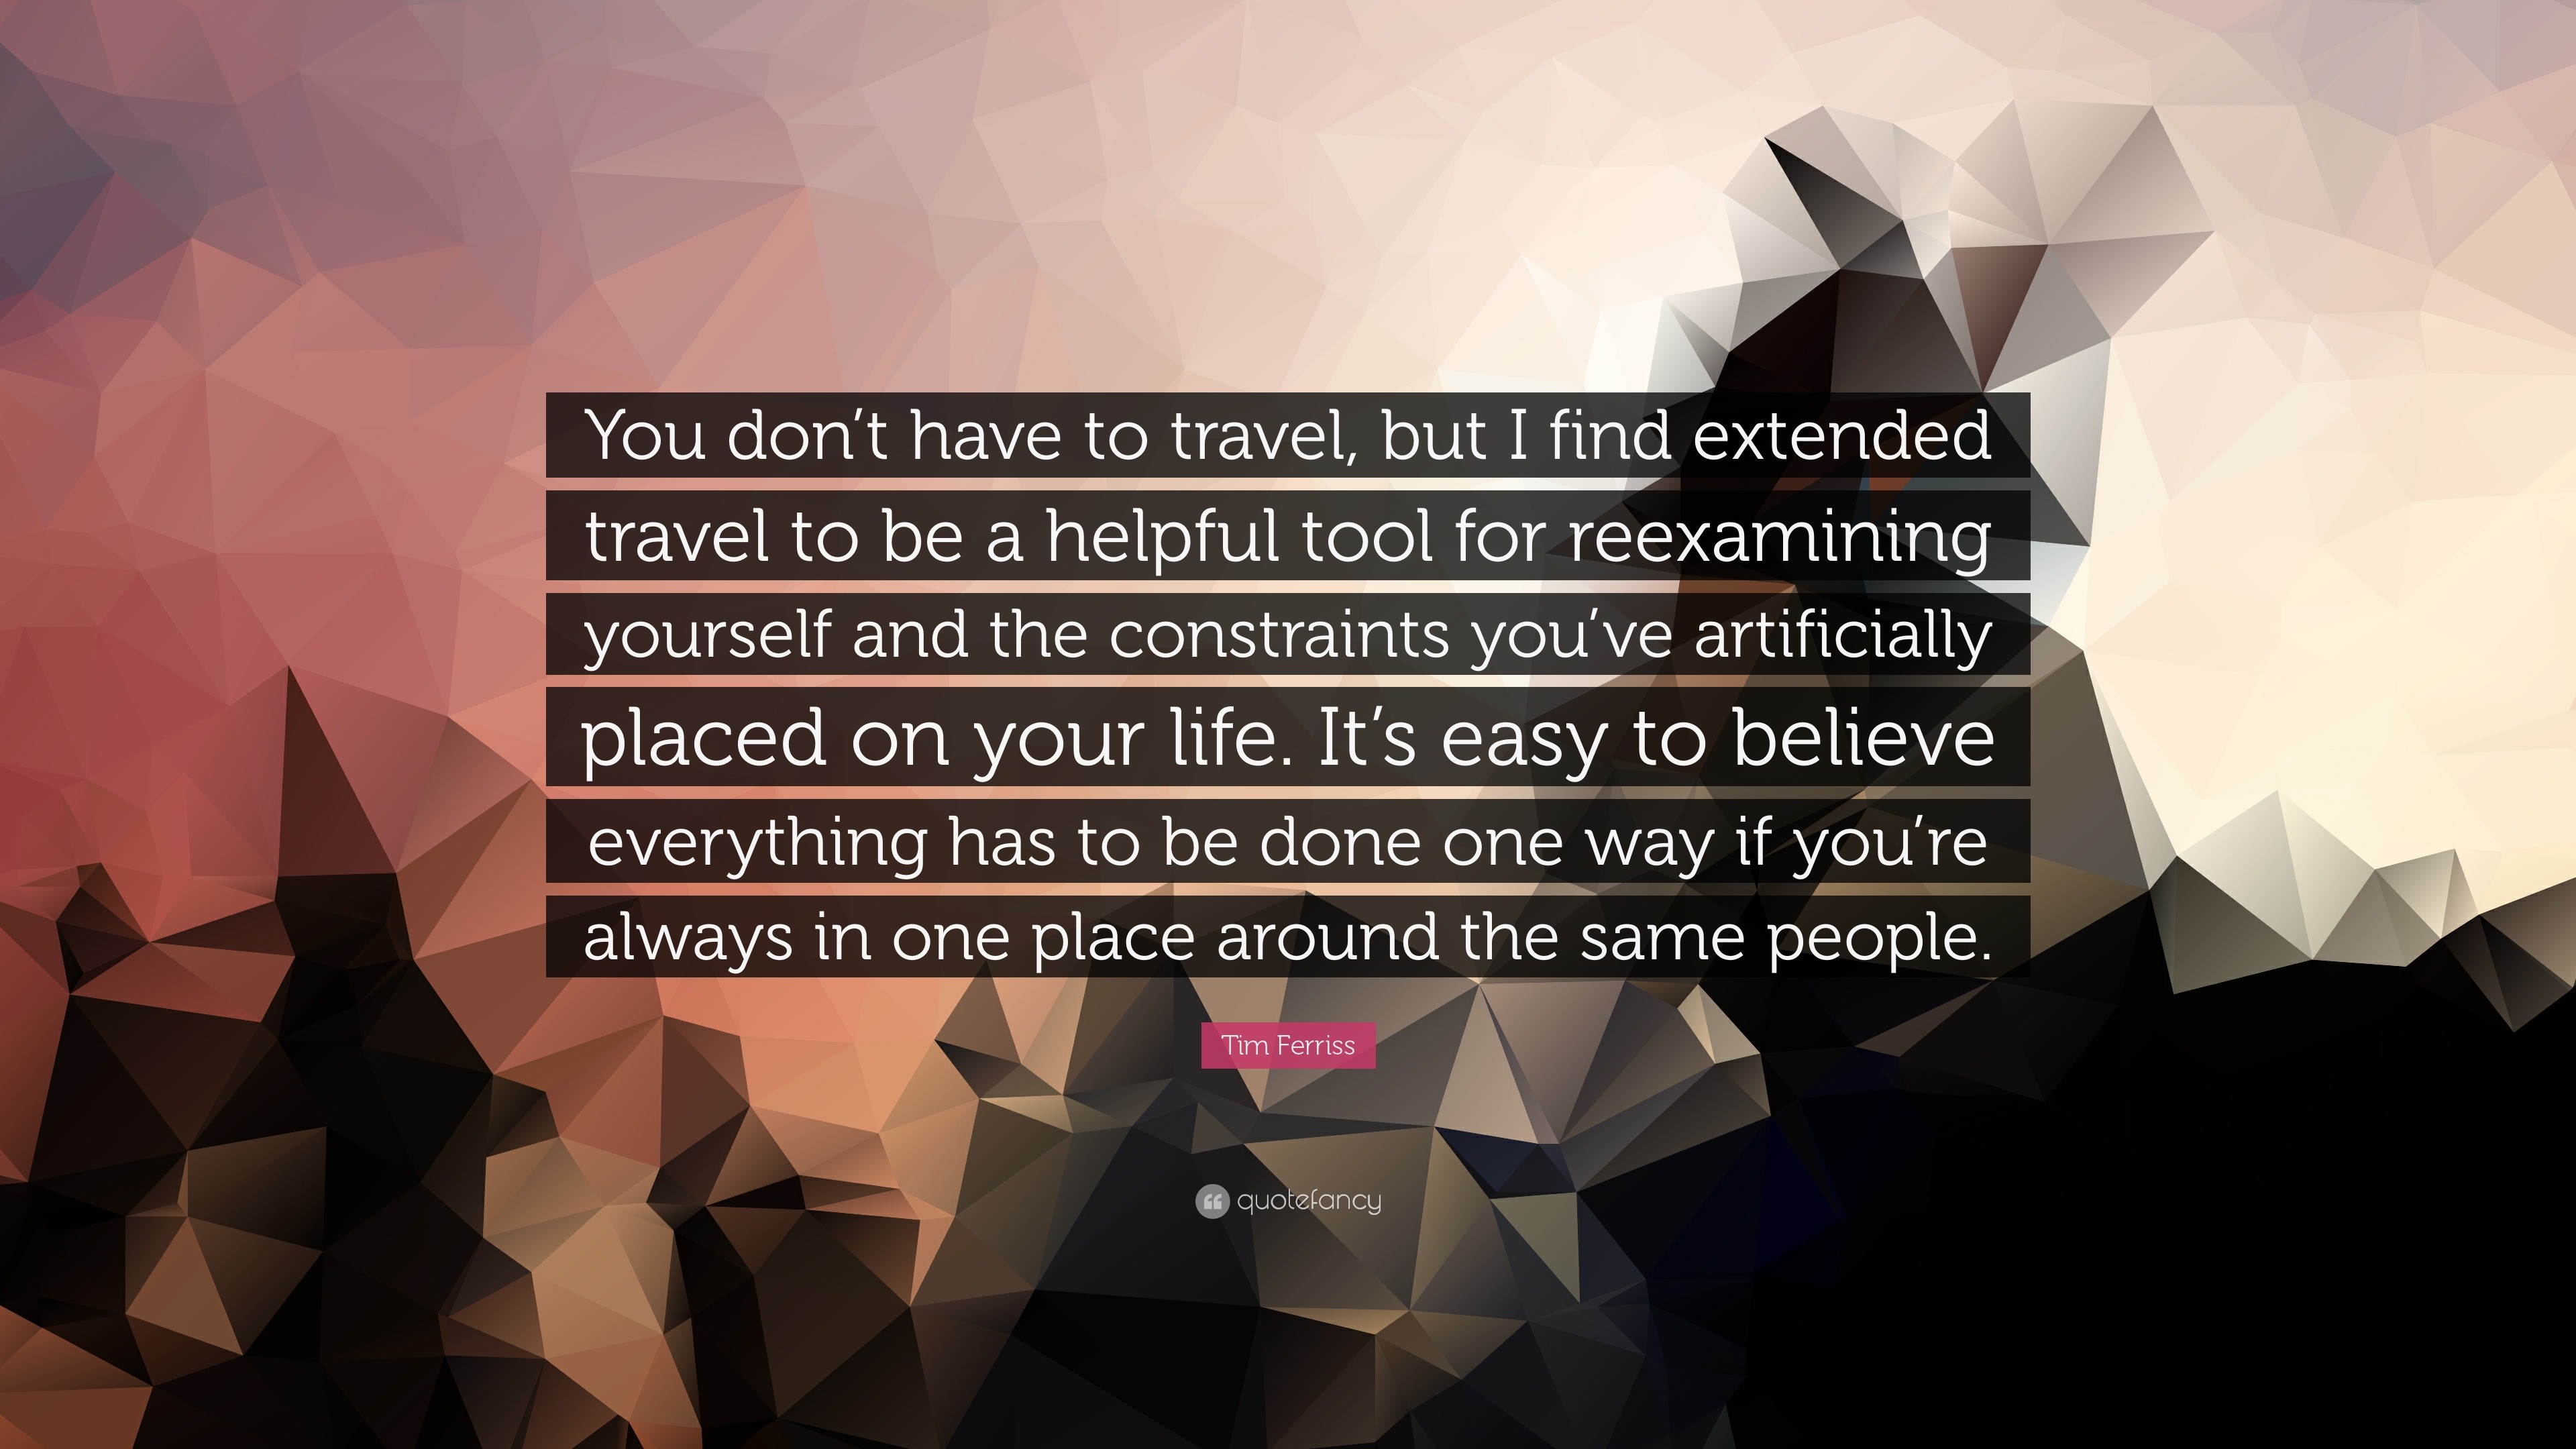 Tim Ferriss Quote: “You don't have to travel, but I find extended travel to  be a helpful tool for reexamining yourself and the constraints y”